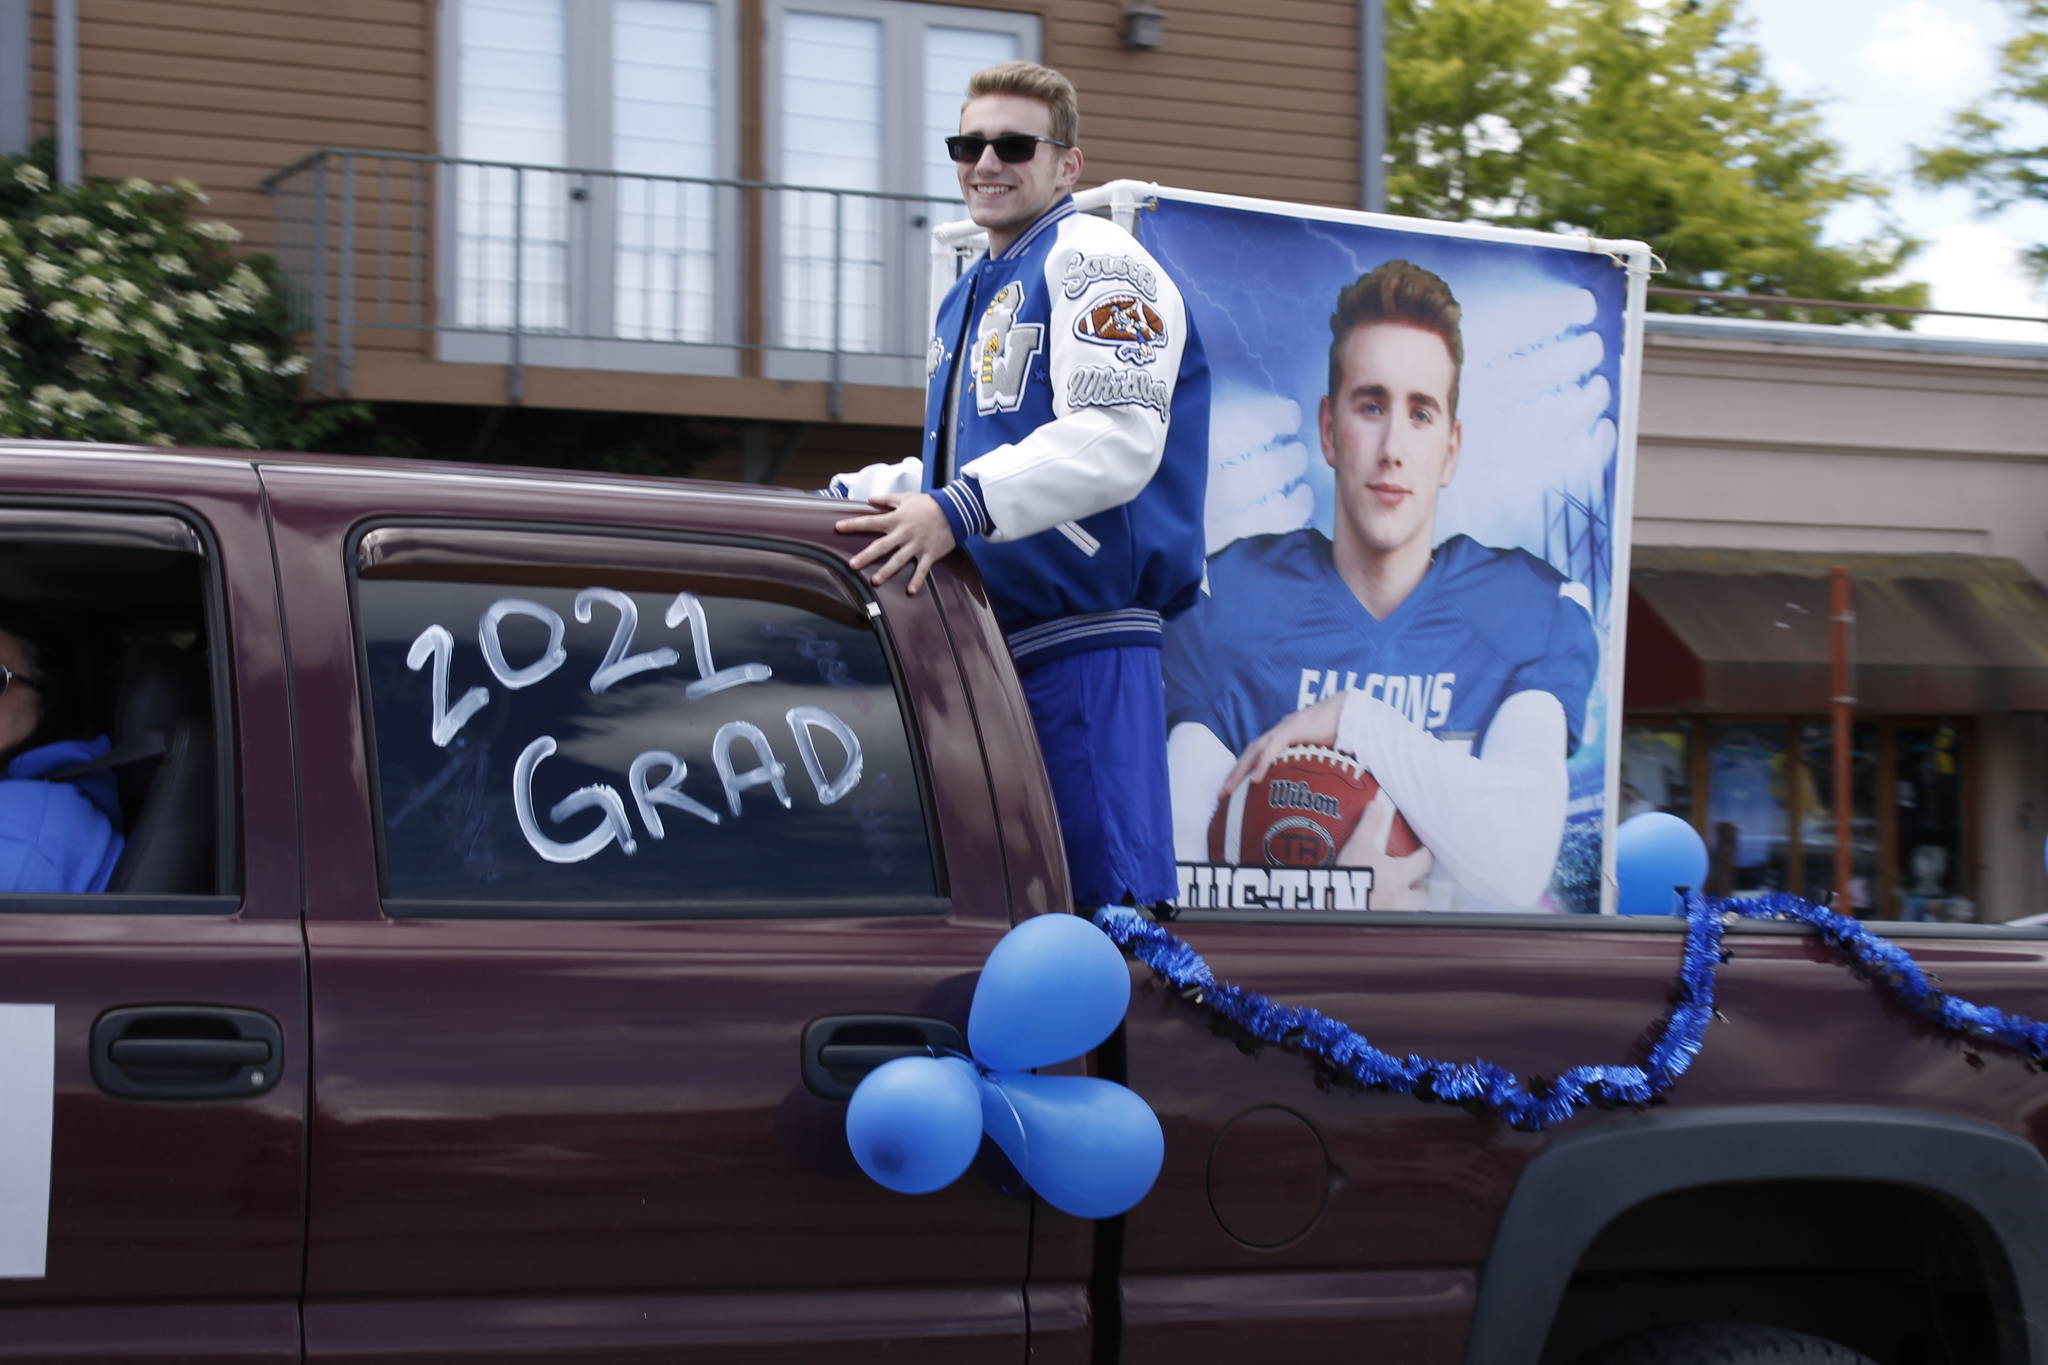 Senior Justin Moberly participates in the parade. (Photos by Kira Erickson/South Whidbey Record)